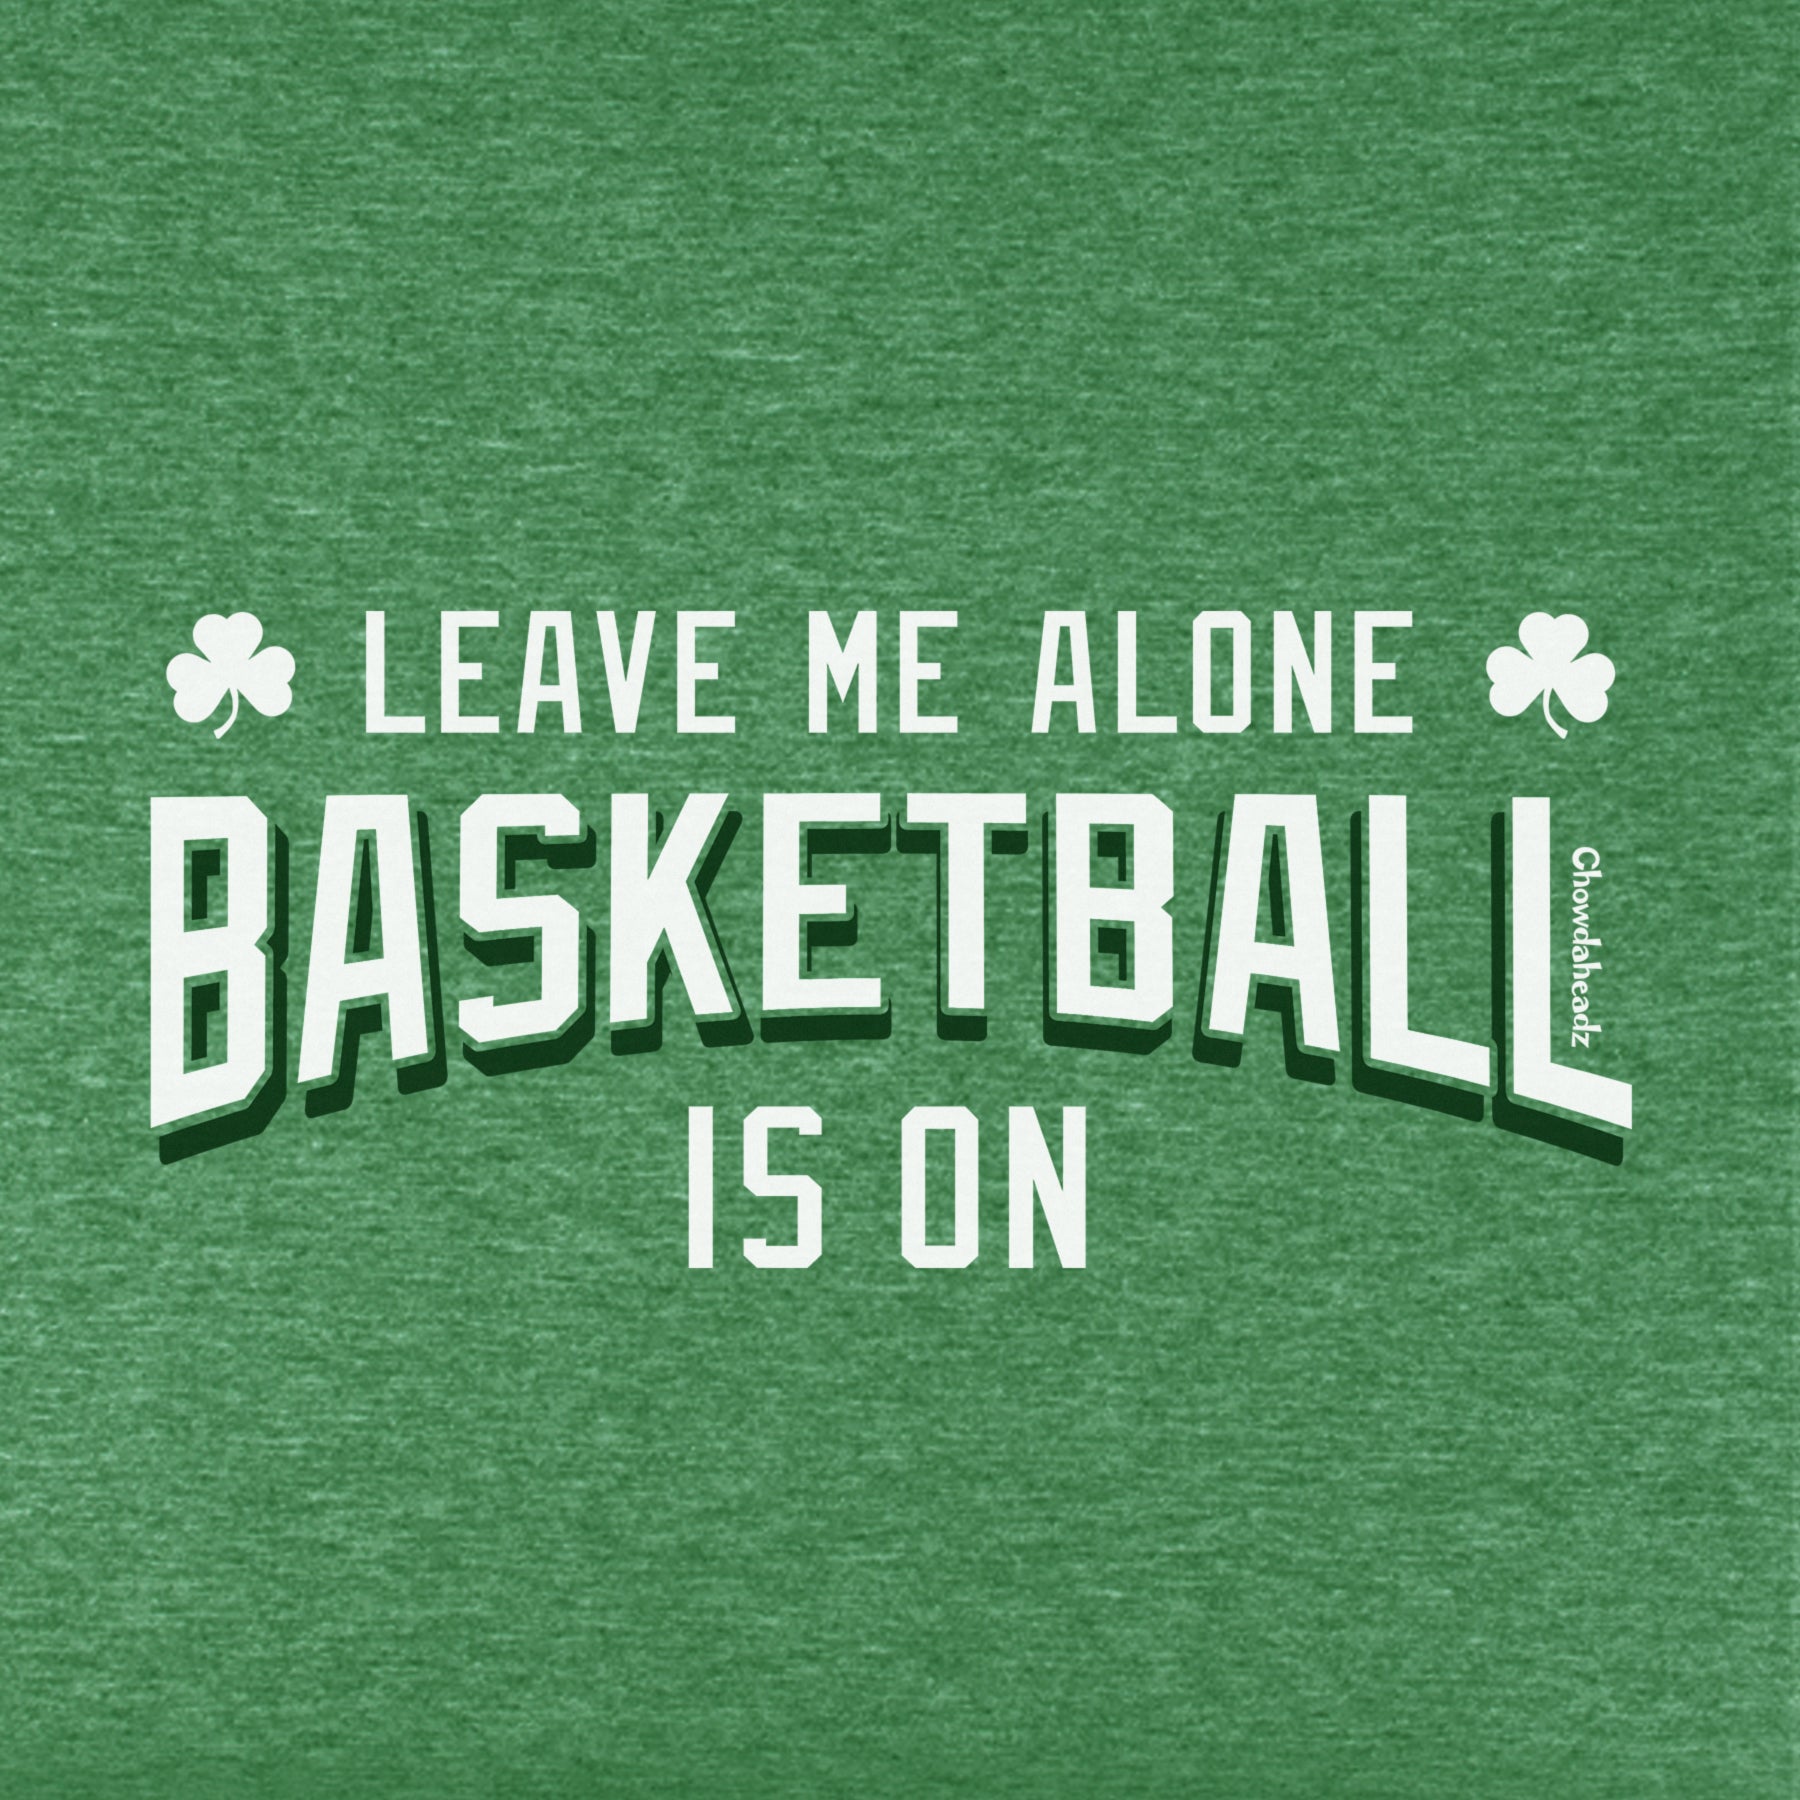 Leave Me Alone Basketball Is On Youth T-Shirt - Chowdaheadz